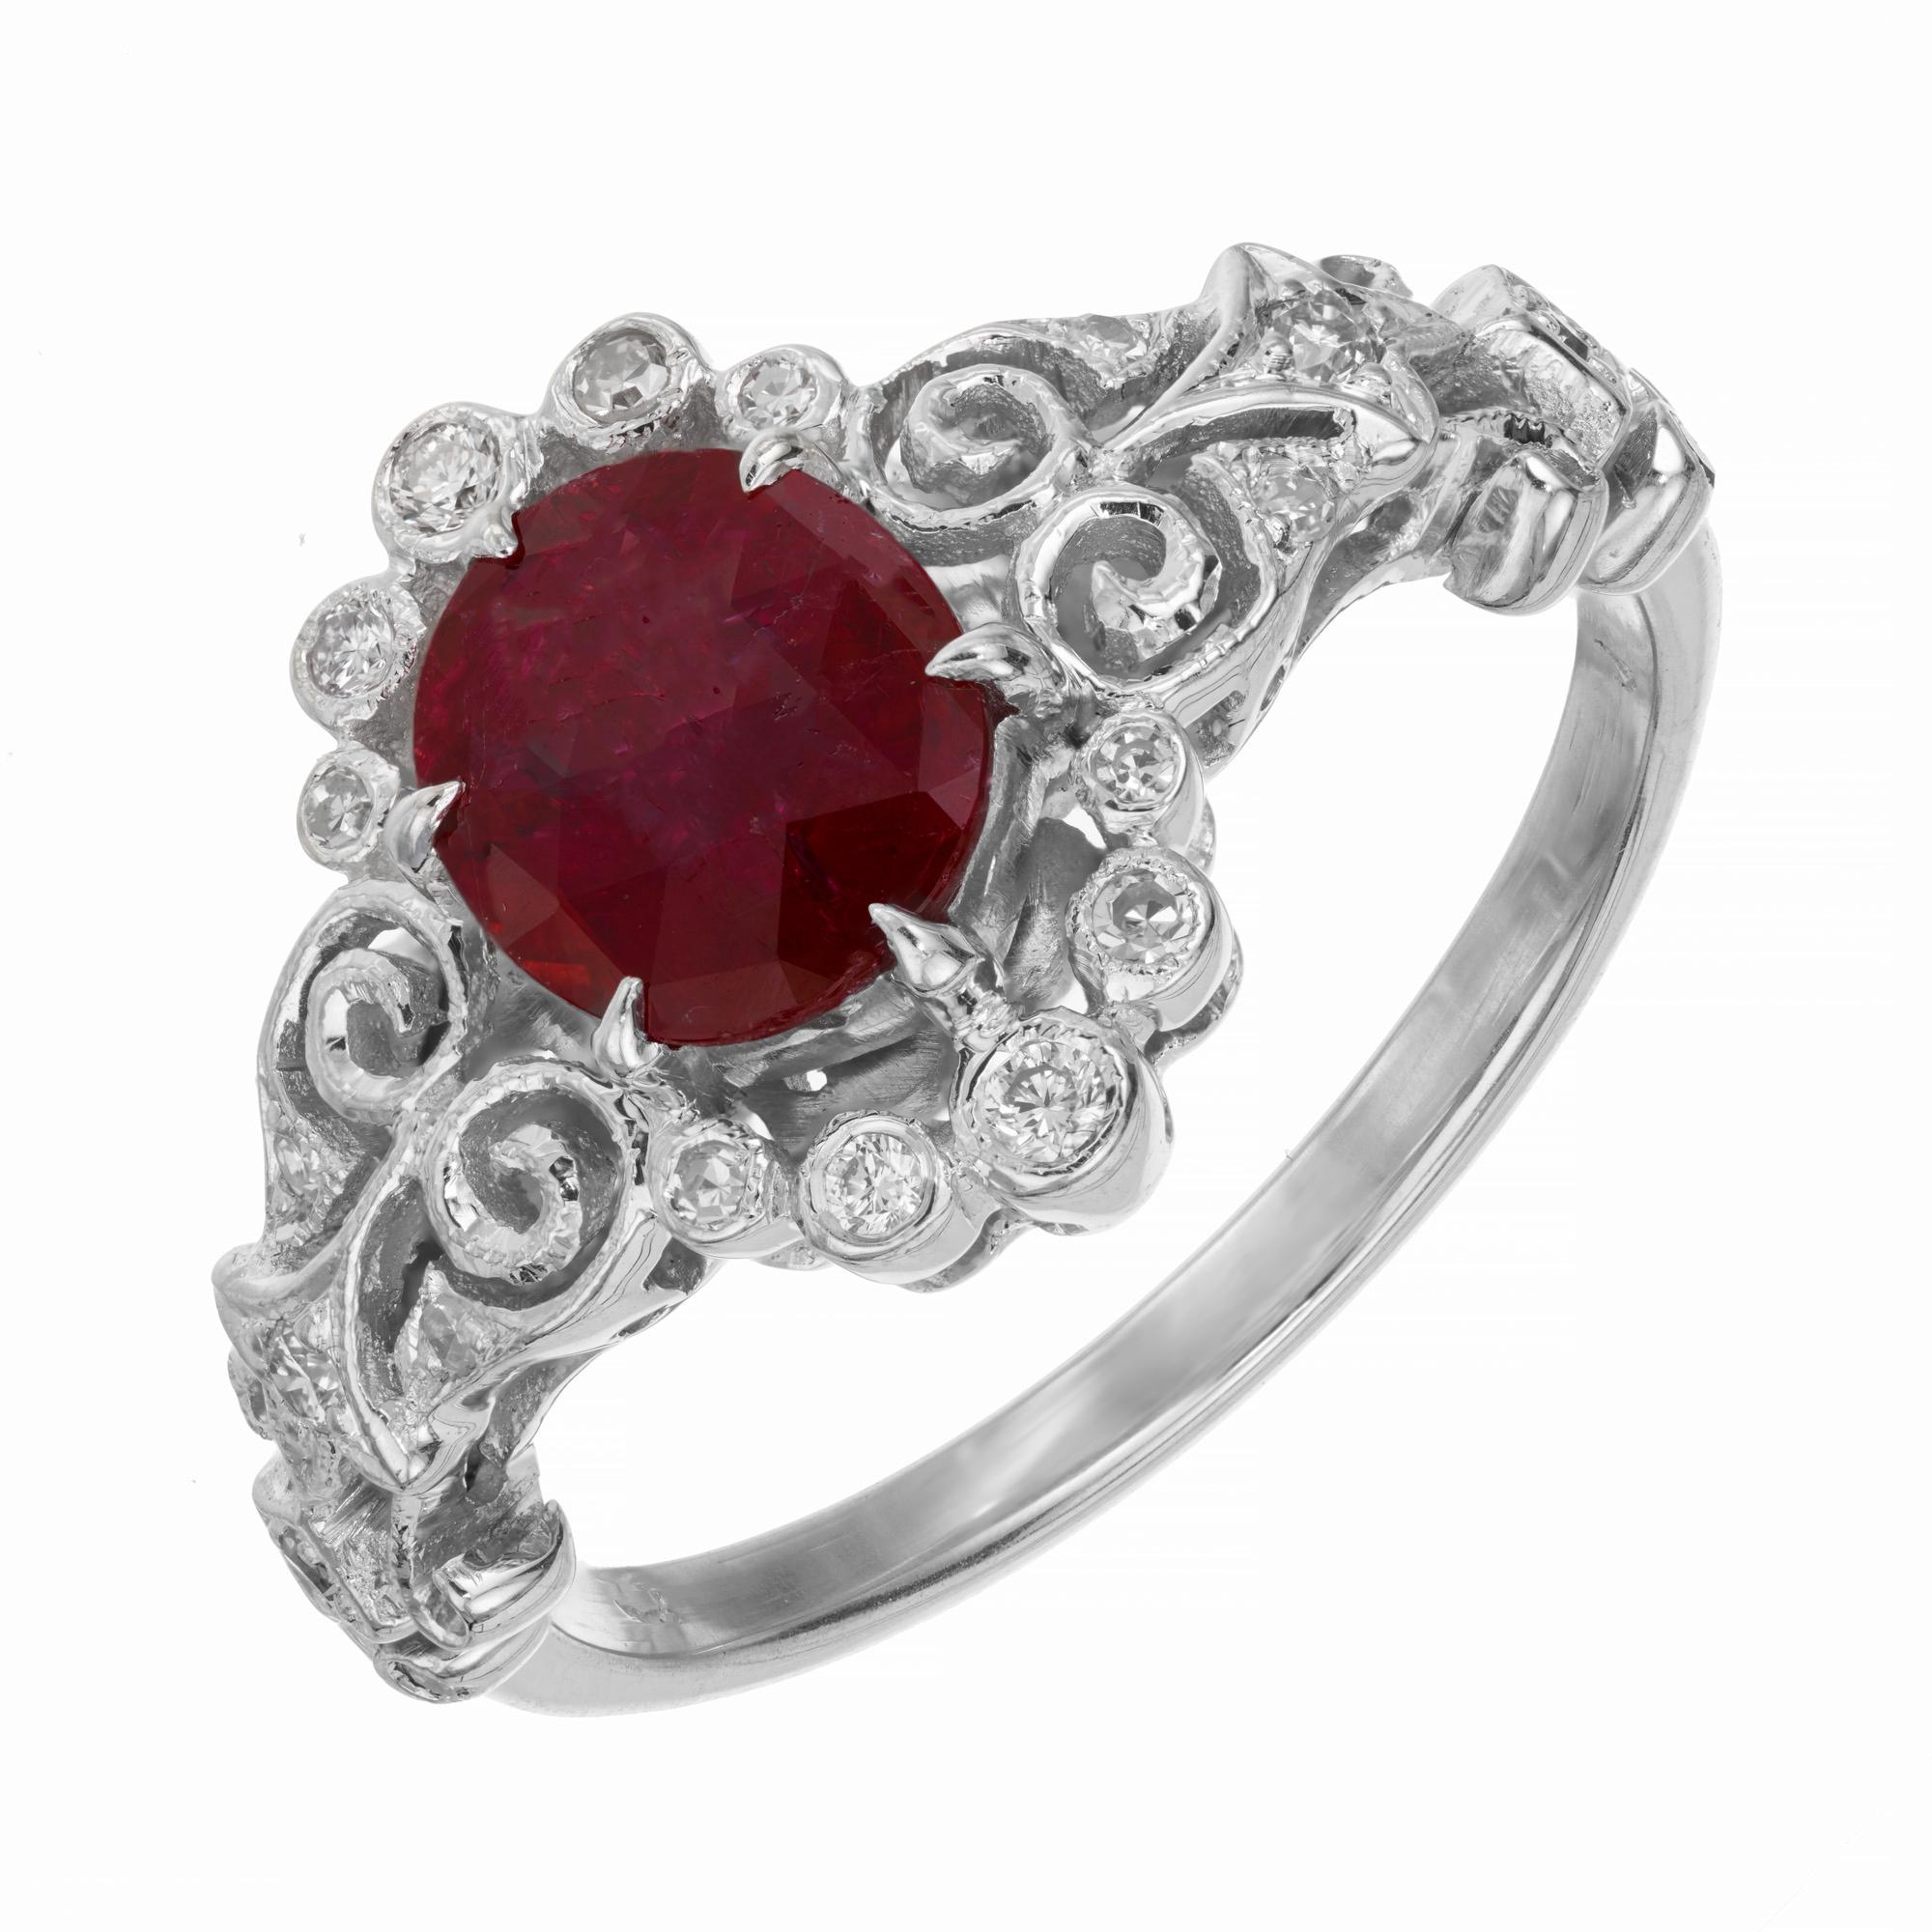 Vintage inspired Ruby and diamond engagement ring. GIA certified simple heat only, oval 1.15 carat ruby center stone mounted in a unique handmade 18k white gold setting with a diamond halo and filigree sides. 24 round accent diamonds complete this